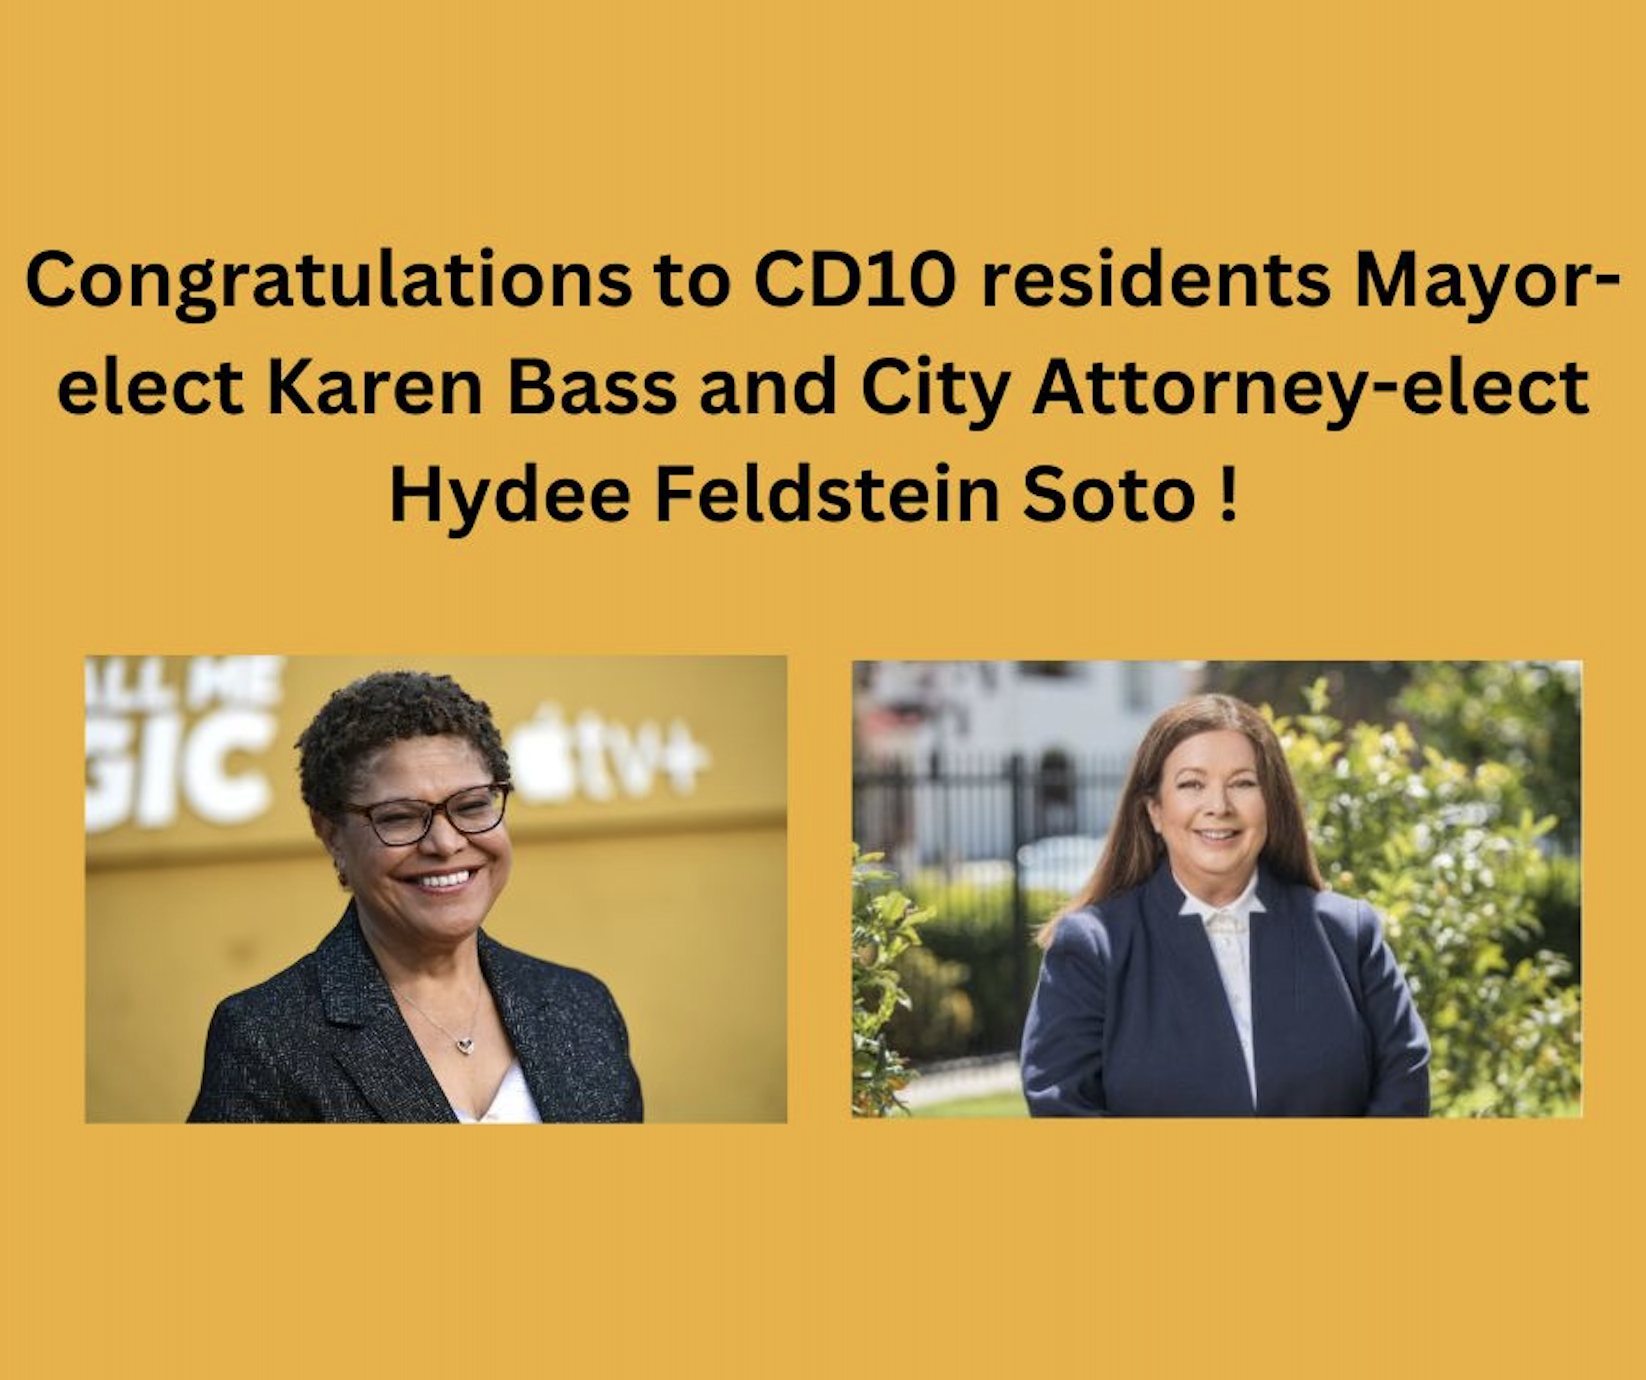 Congratulations to CD10 residents Mayor-elect Karen Bass and City Attorney-elect Hydee Feldstein Soto!